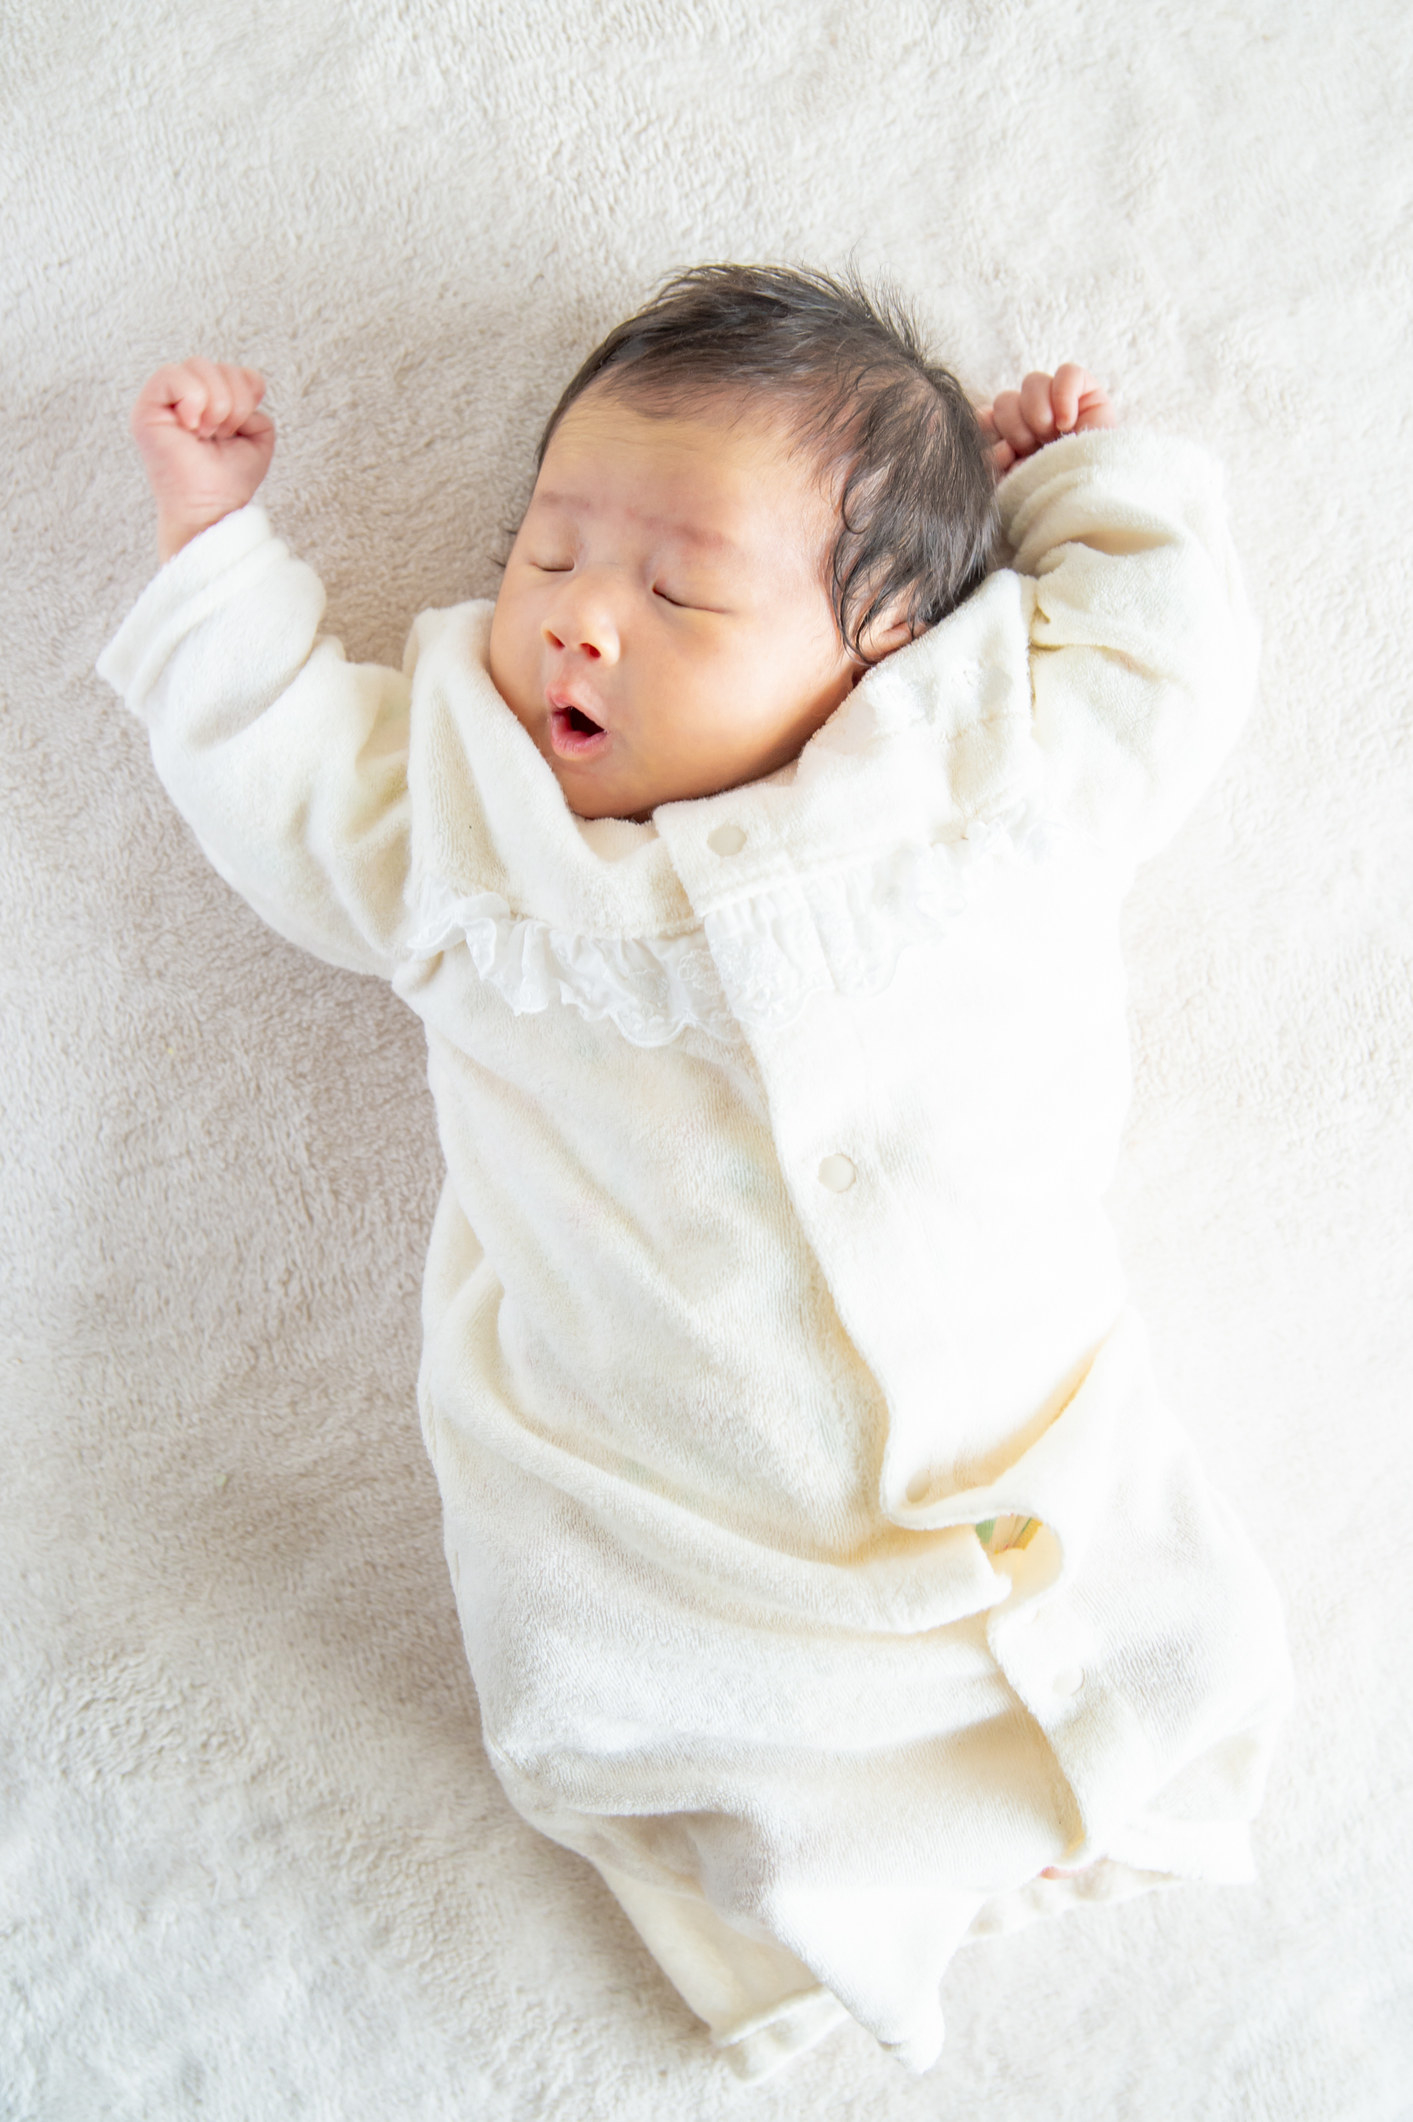 A newborn baby stretching her arms.